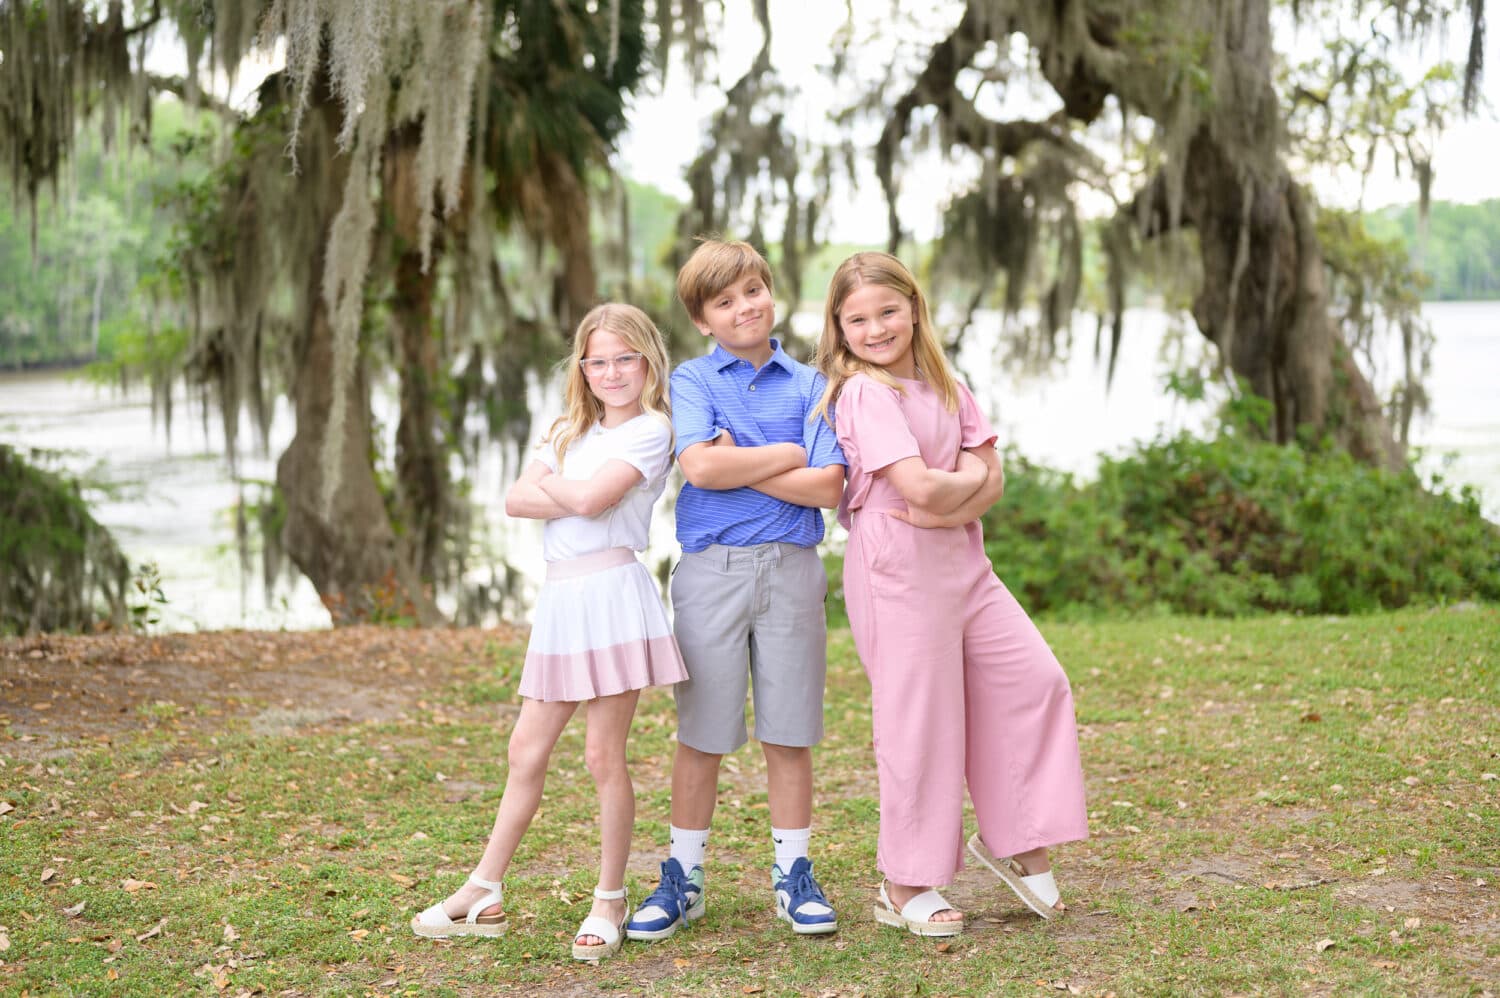 Brother giving a silly pose with his sister and cousin - Wachesaw Plantation